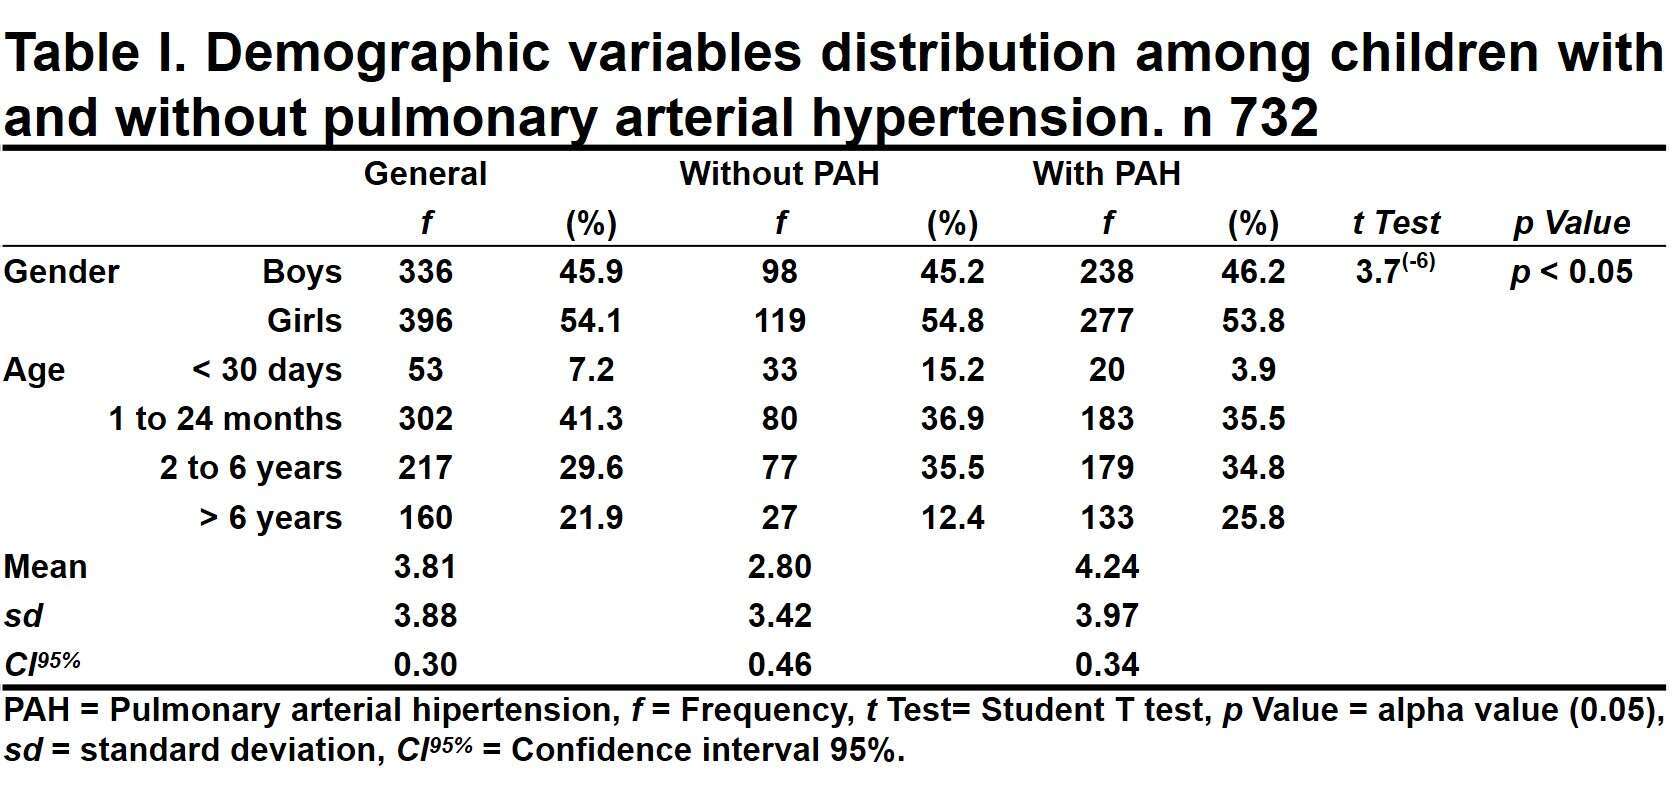 Table I. Distribution of demographic variables